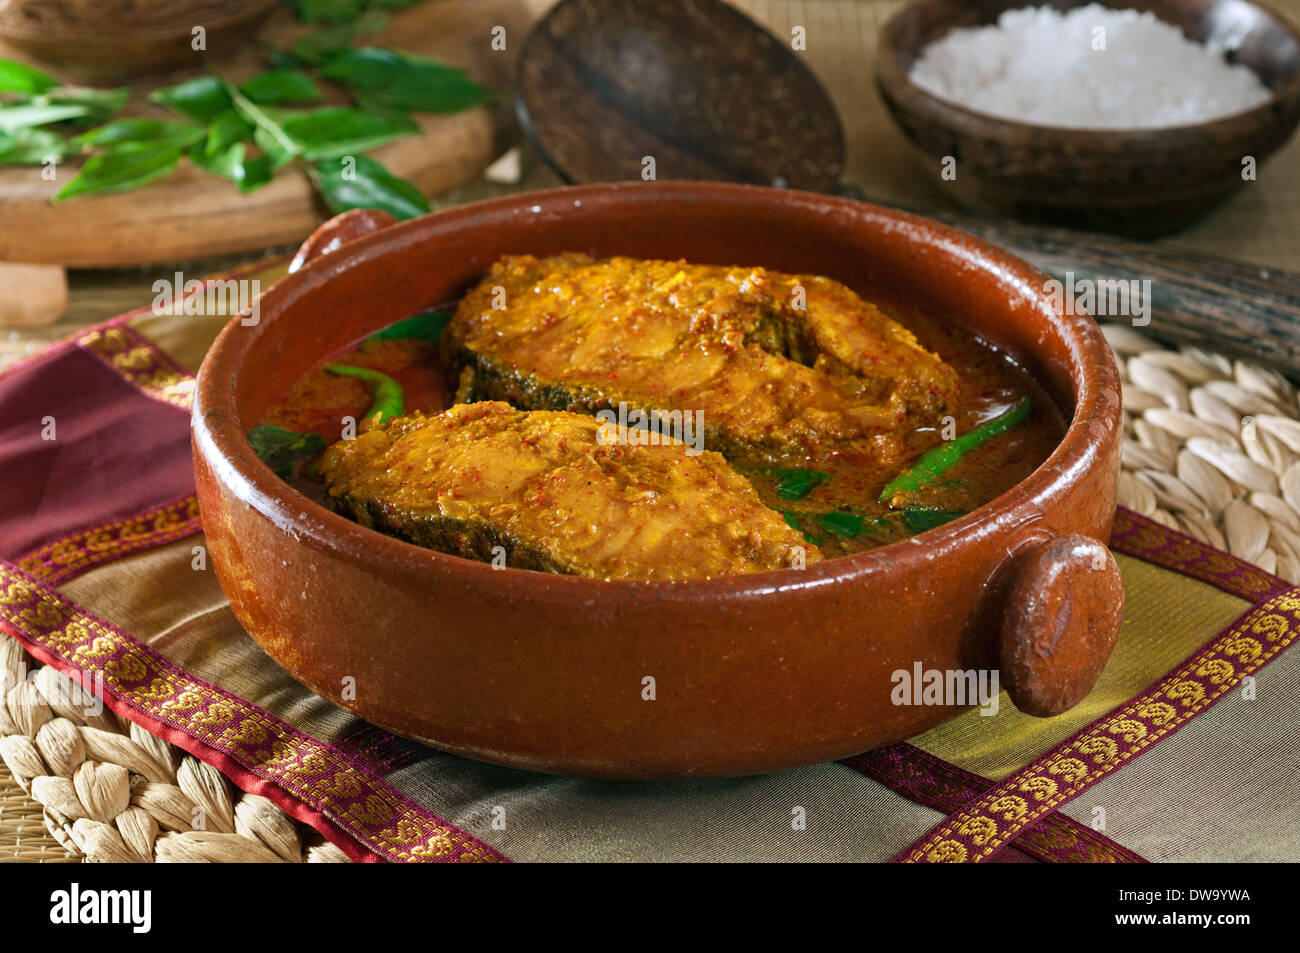 Mangalore fish curry. South west India Food Stock Photo